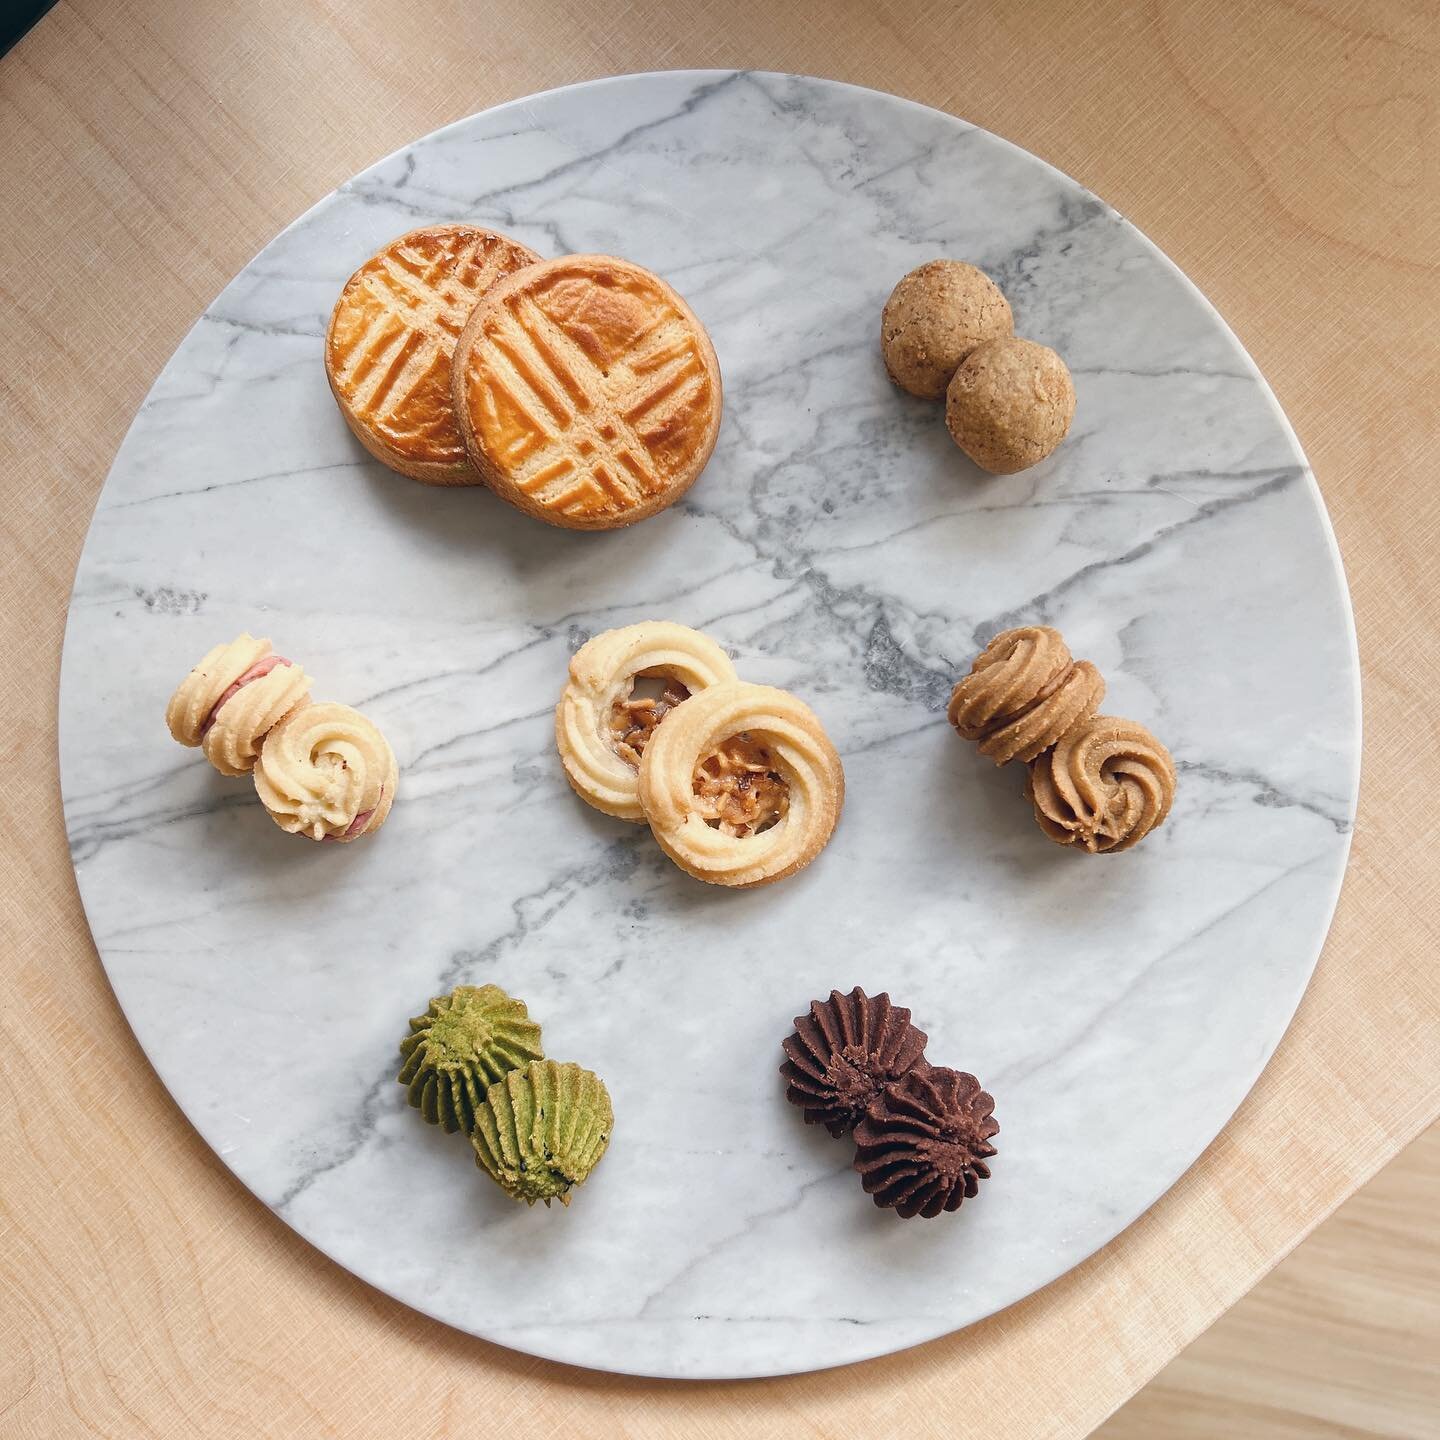 &lt;The Cookie Box v.1&gt;

Super super super excited about our first ever assorted cookie box! 

Celebrating a few of our favorites - Cranberry/Coffee &amp; Speculoos Viennese Whirls, Toffeenut Viennese Swirls, and brand new cookies - traditional Fr